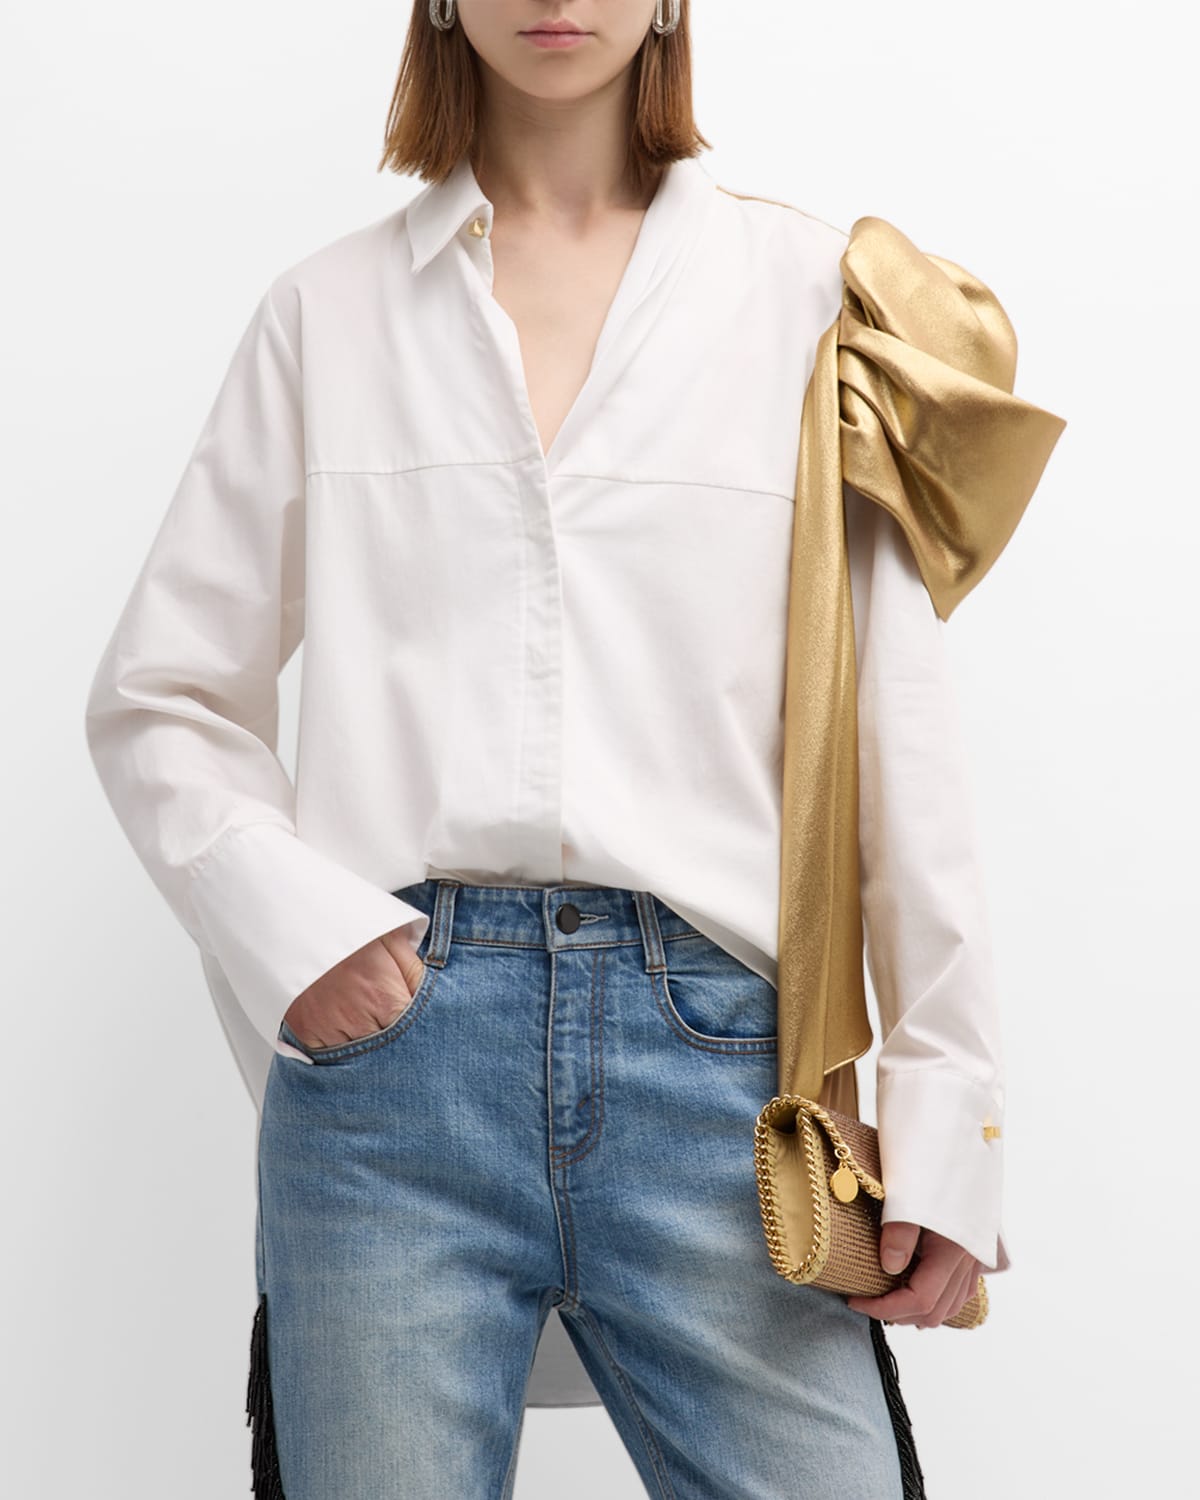 Hellessy Liam Metallic Bustle Collared Shirt In White/gold